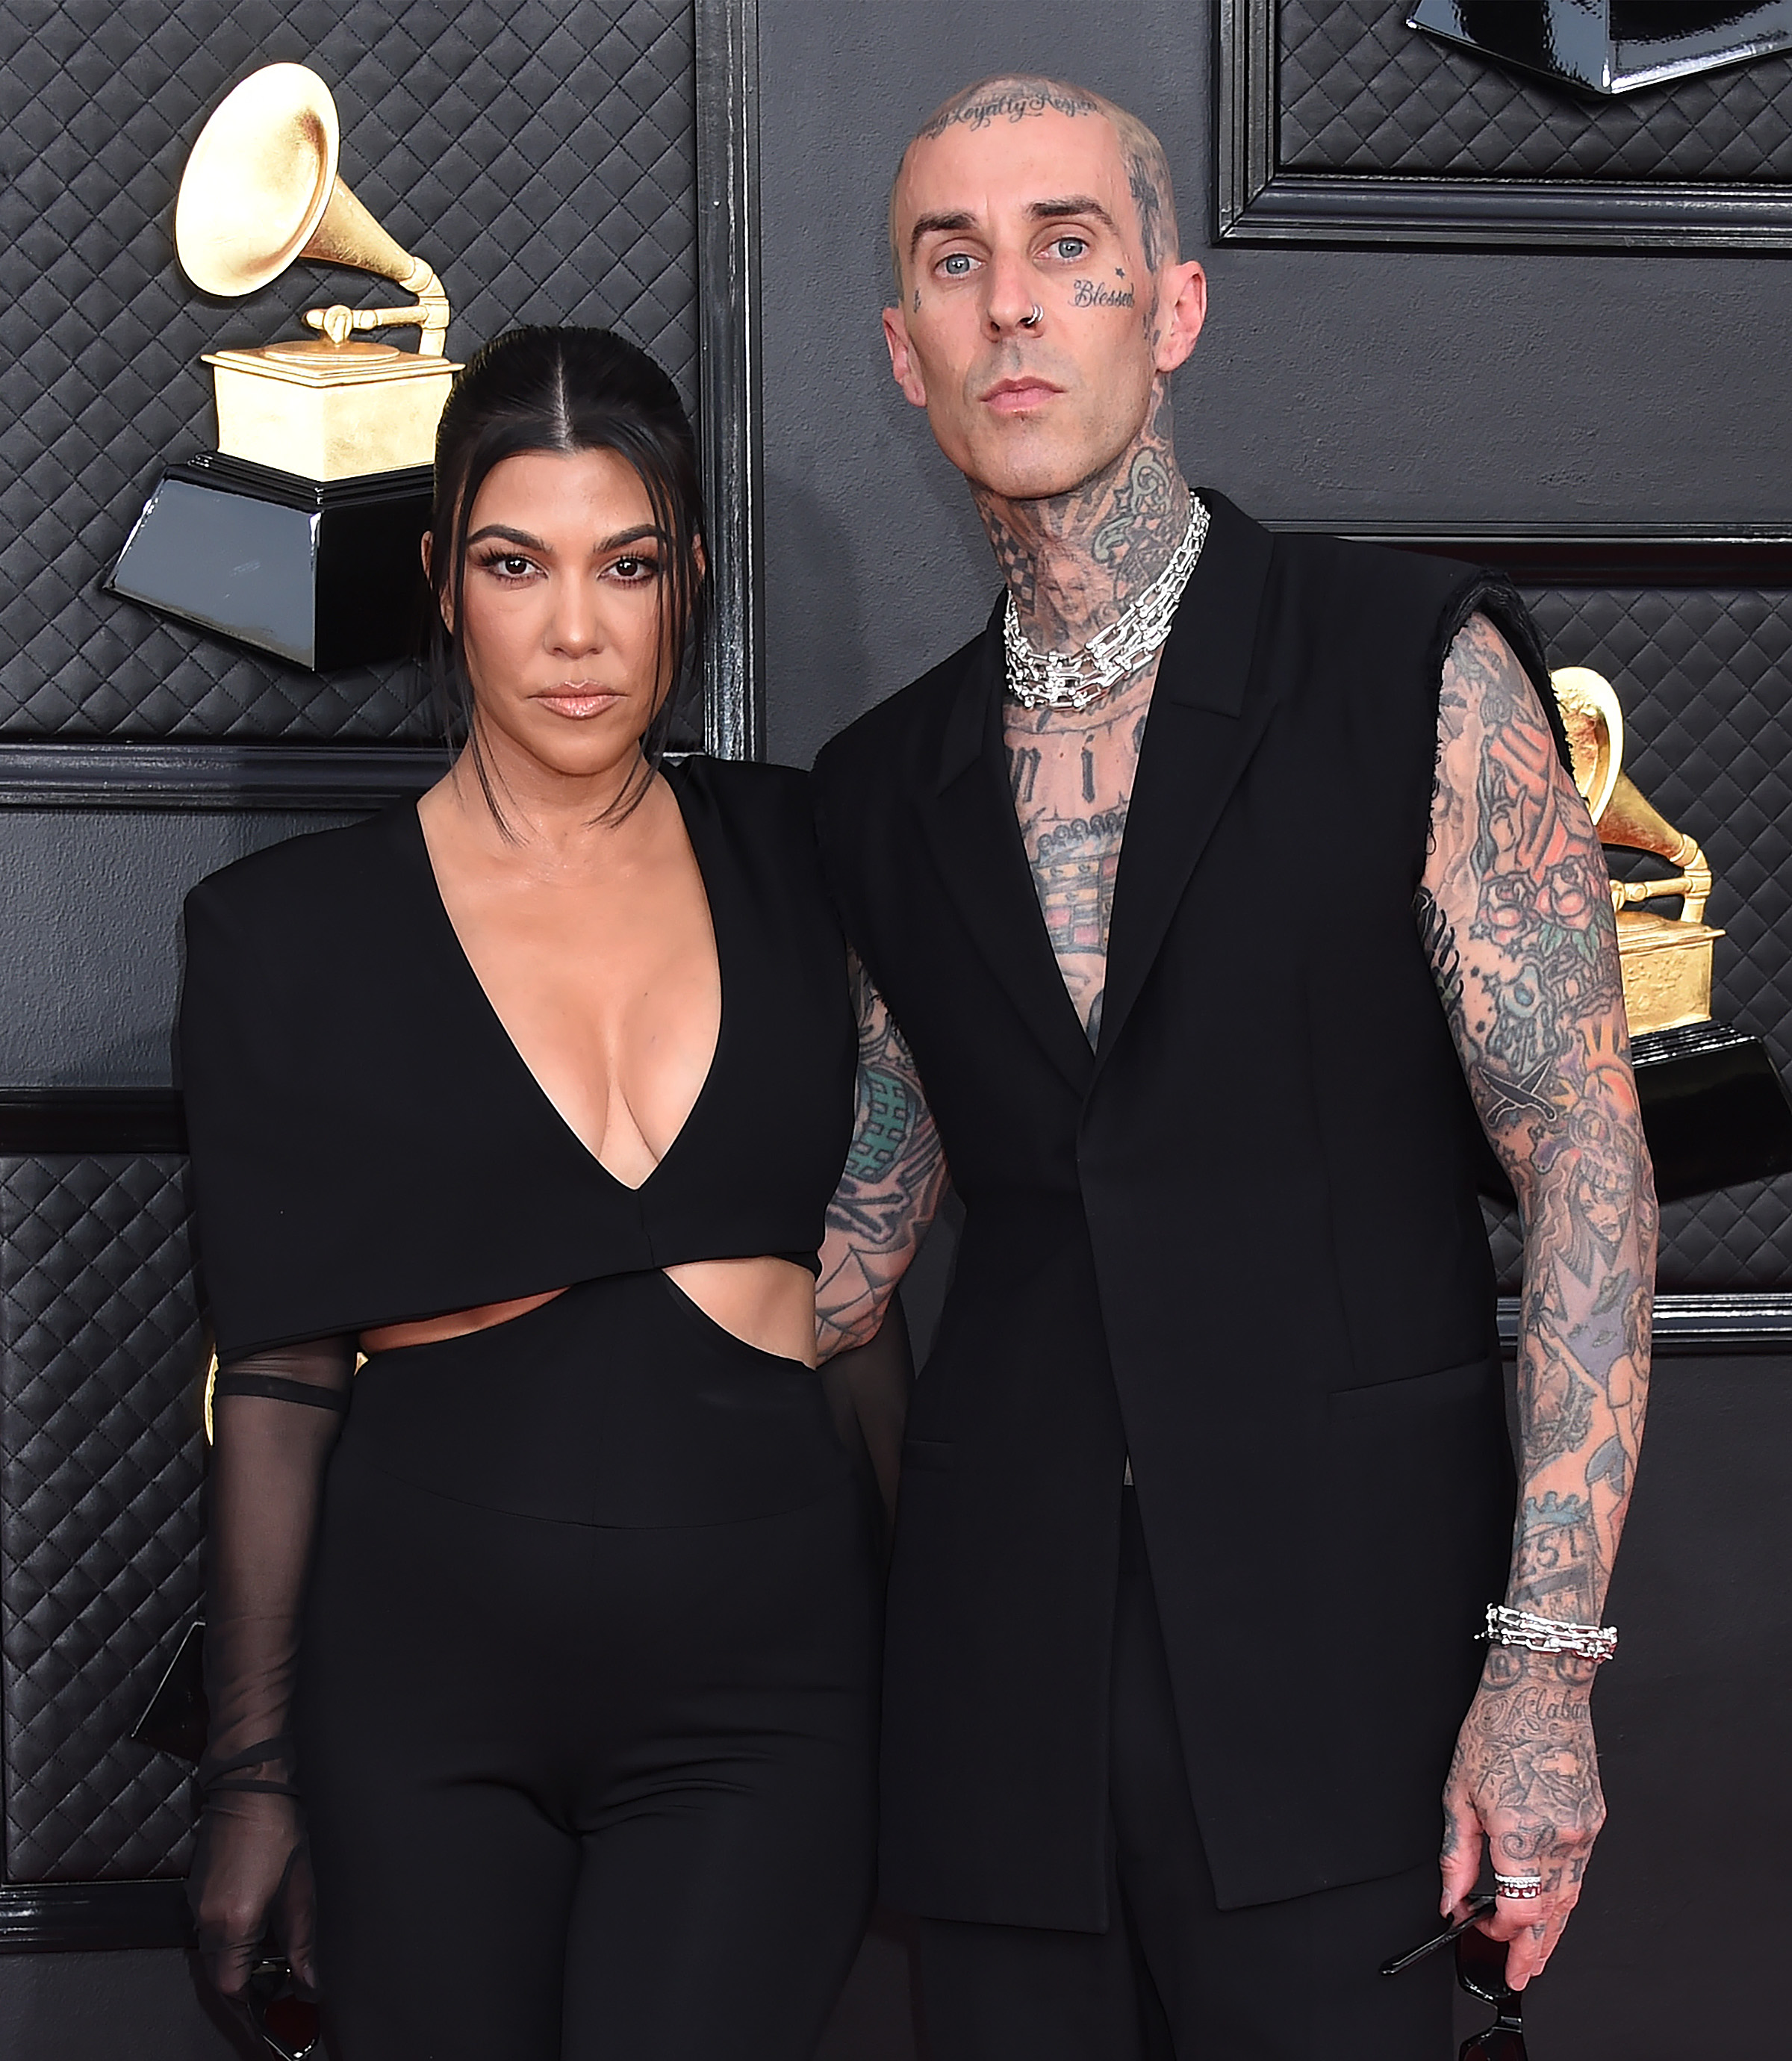 Travis and Kourtney have had memorable Grammy nights in the past